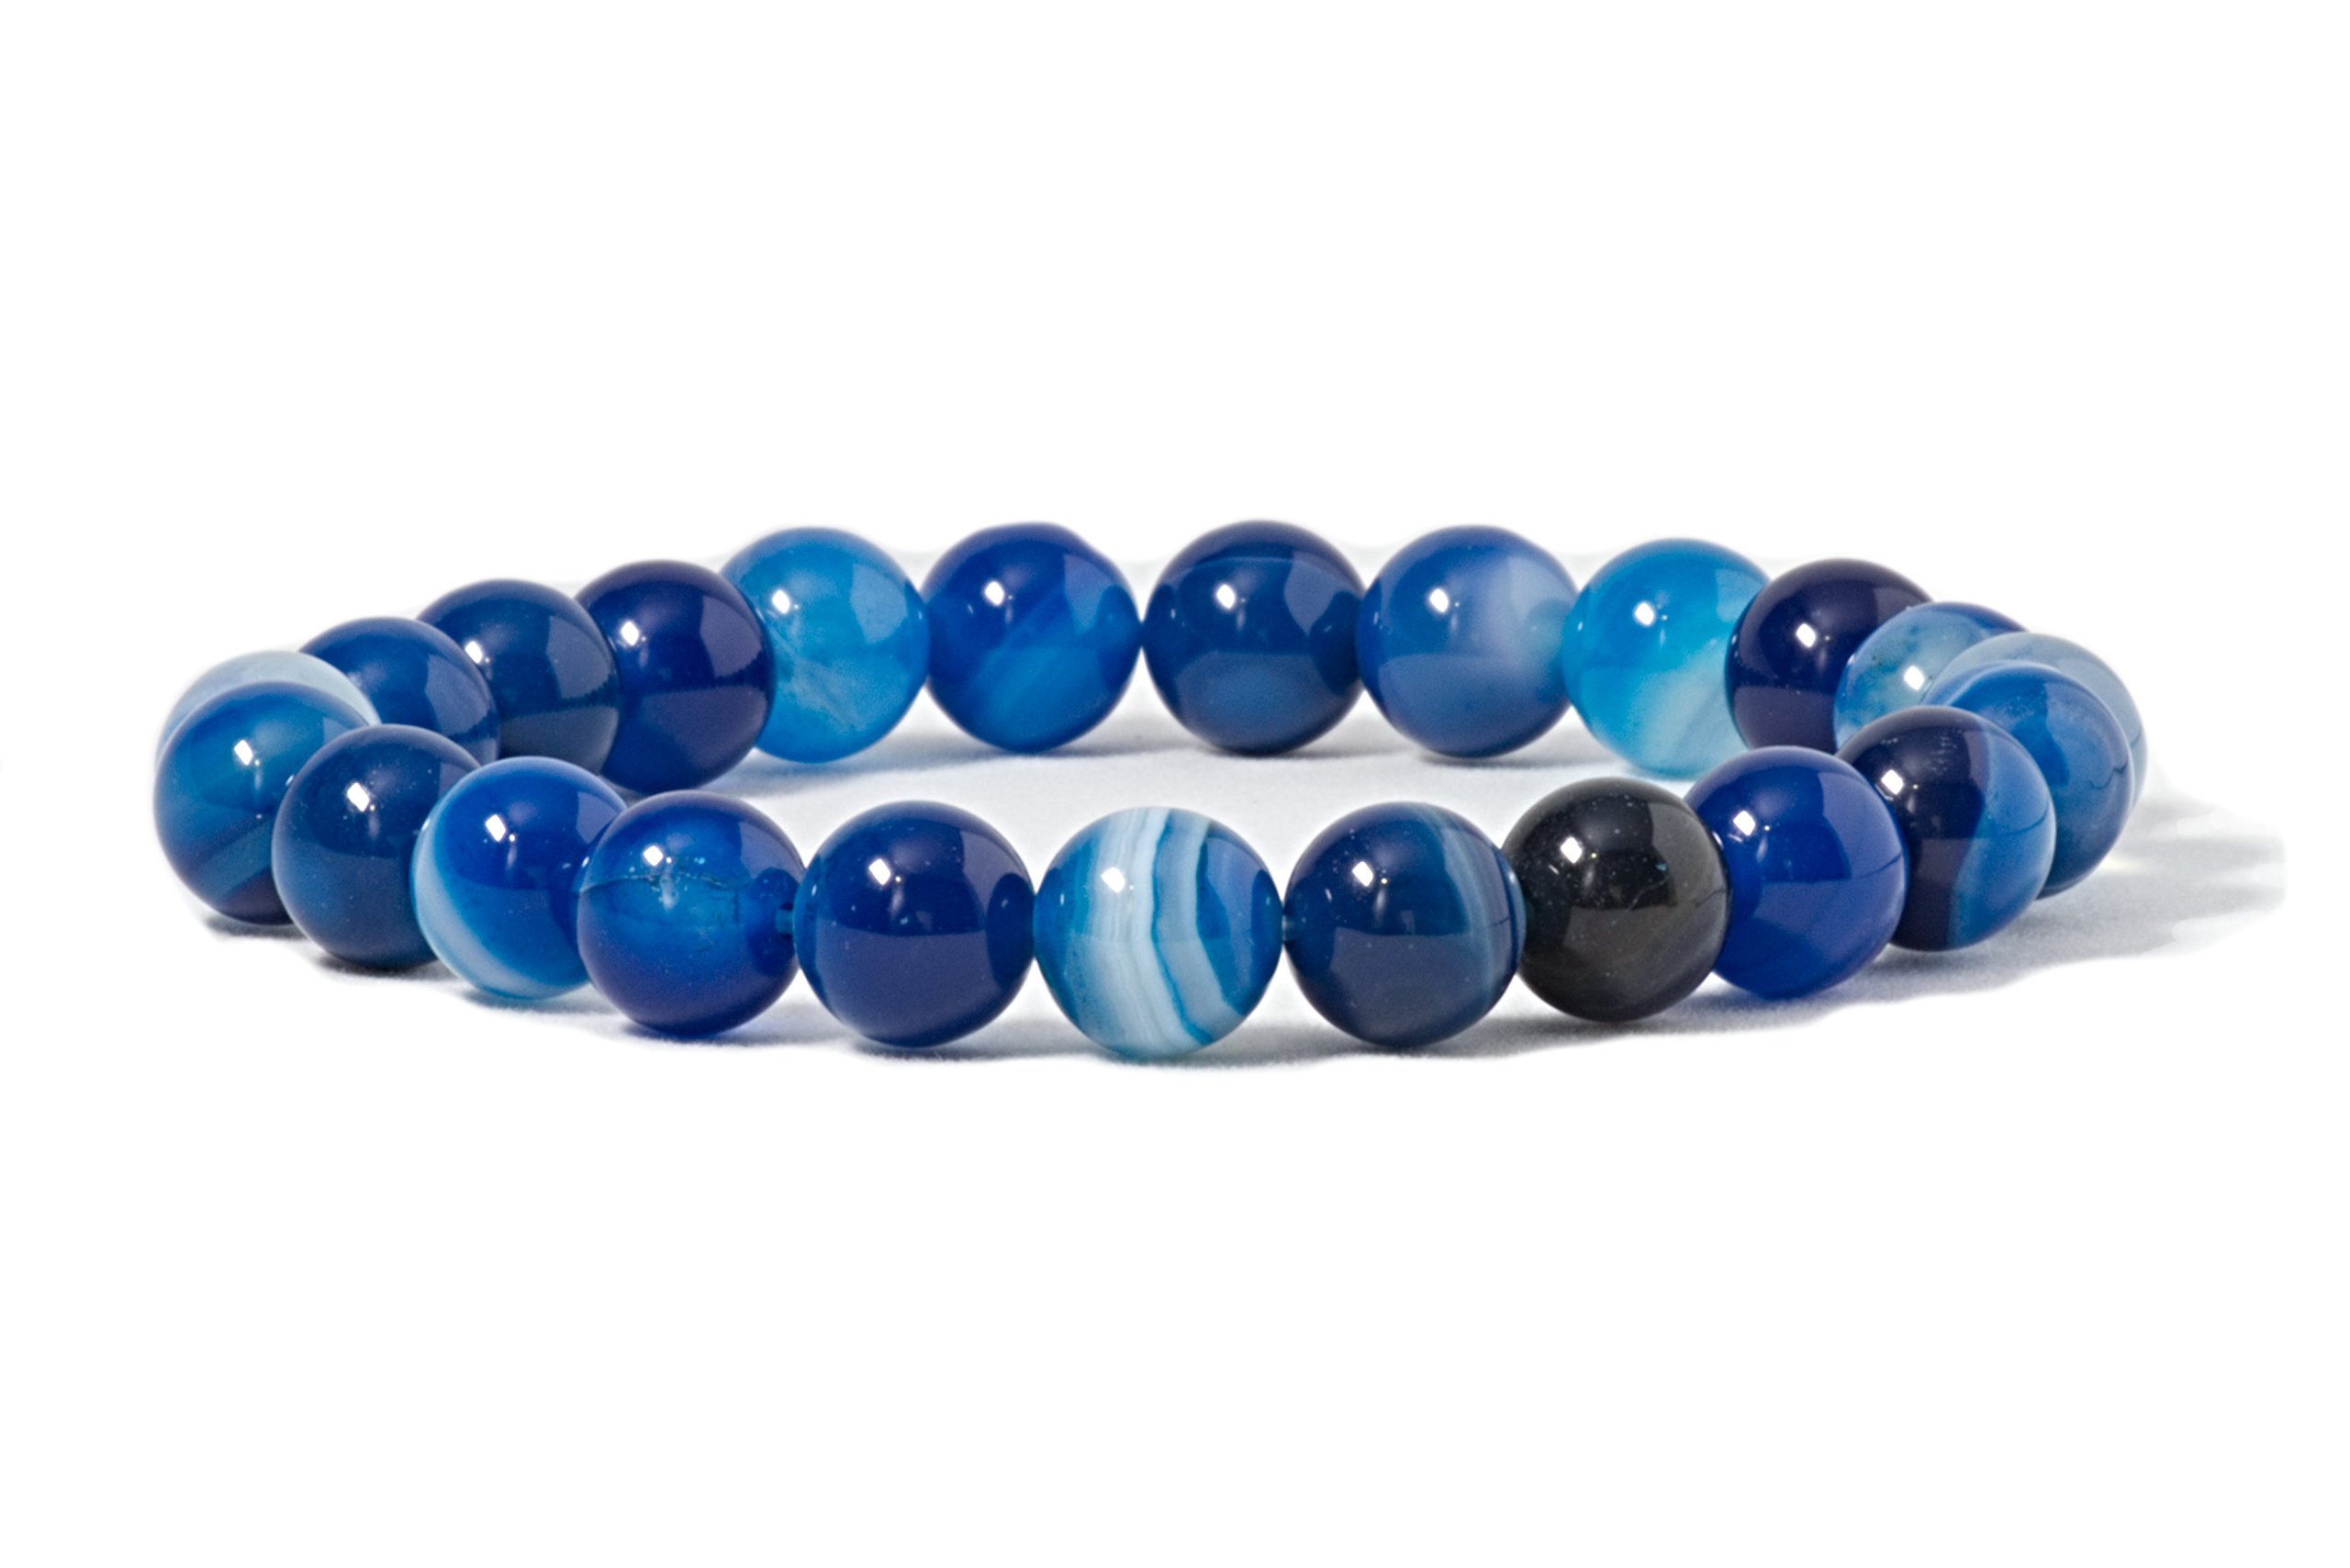 Cherry Tree Collection Semi Precious Gemstone Beaded Stretch Bracelet 8mm Round Beads 7" (Lace Agate - Blue)